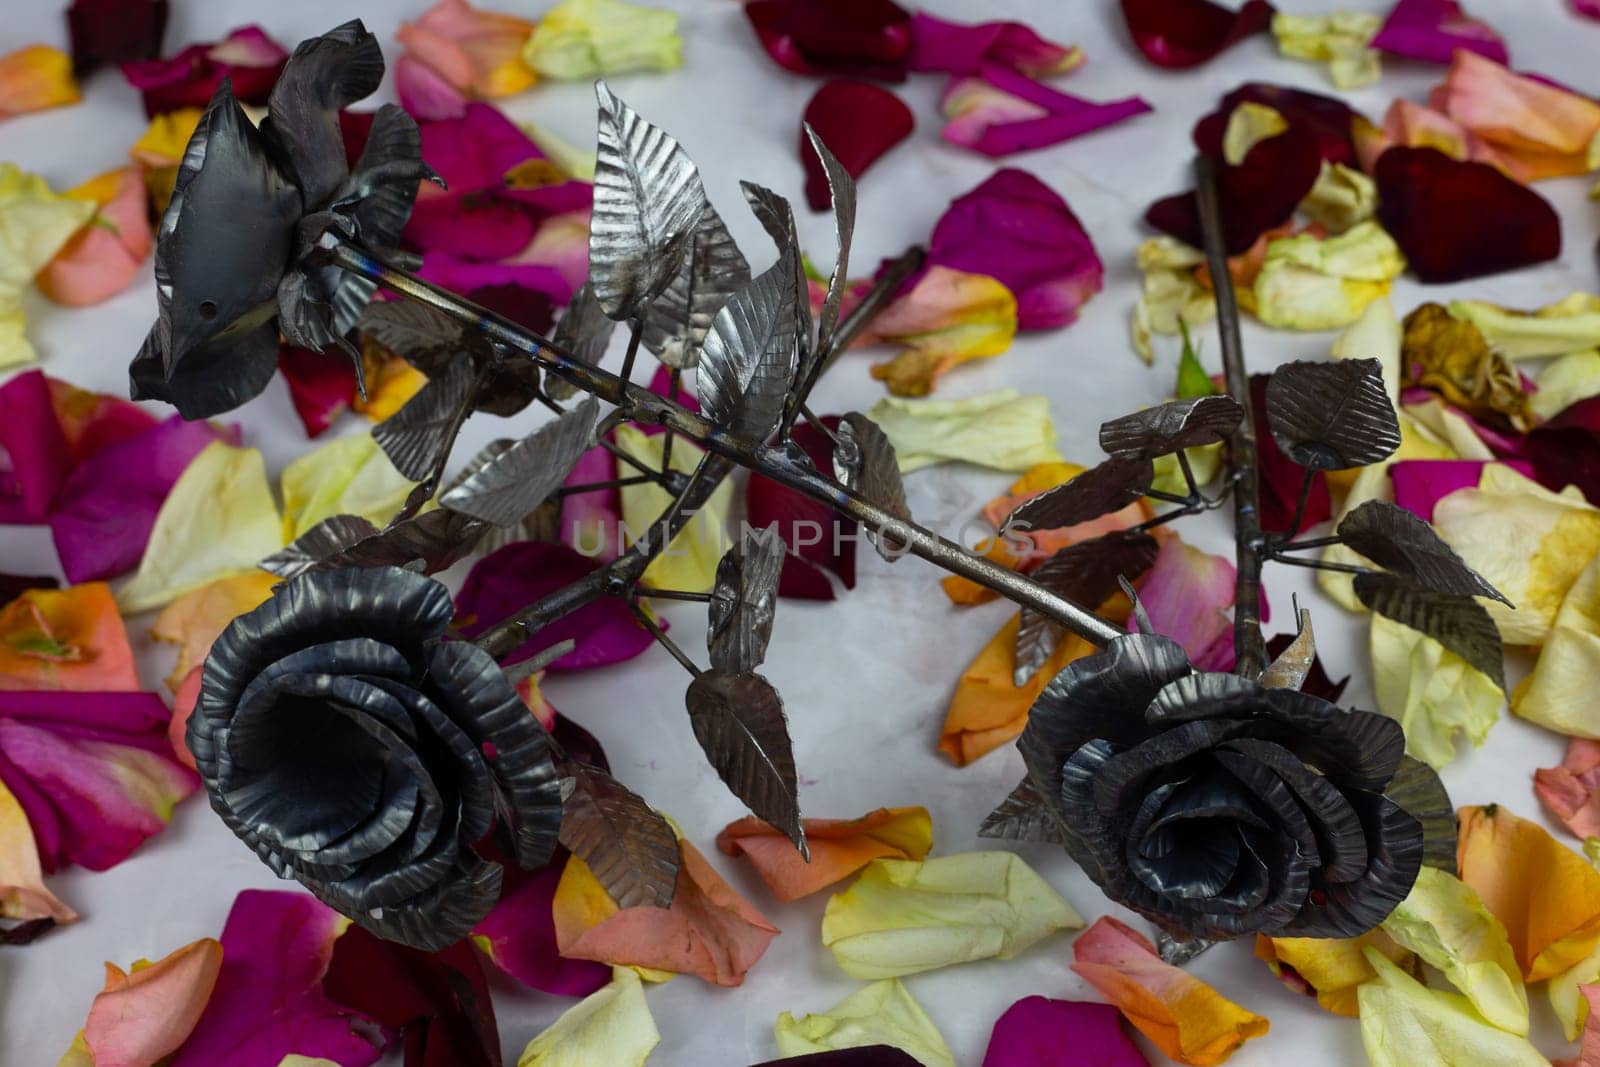 Metal roses as holiday gift, artificial flowers against the background of real rose petals